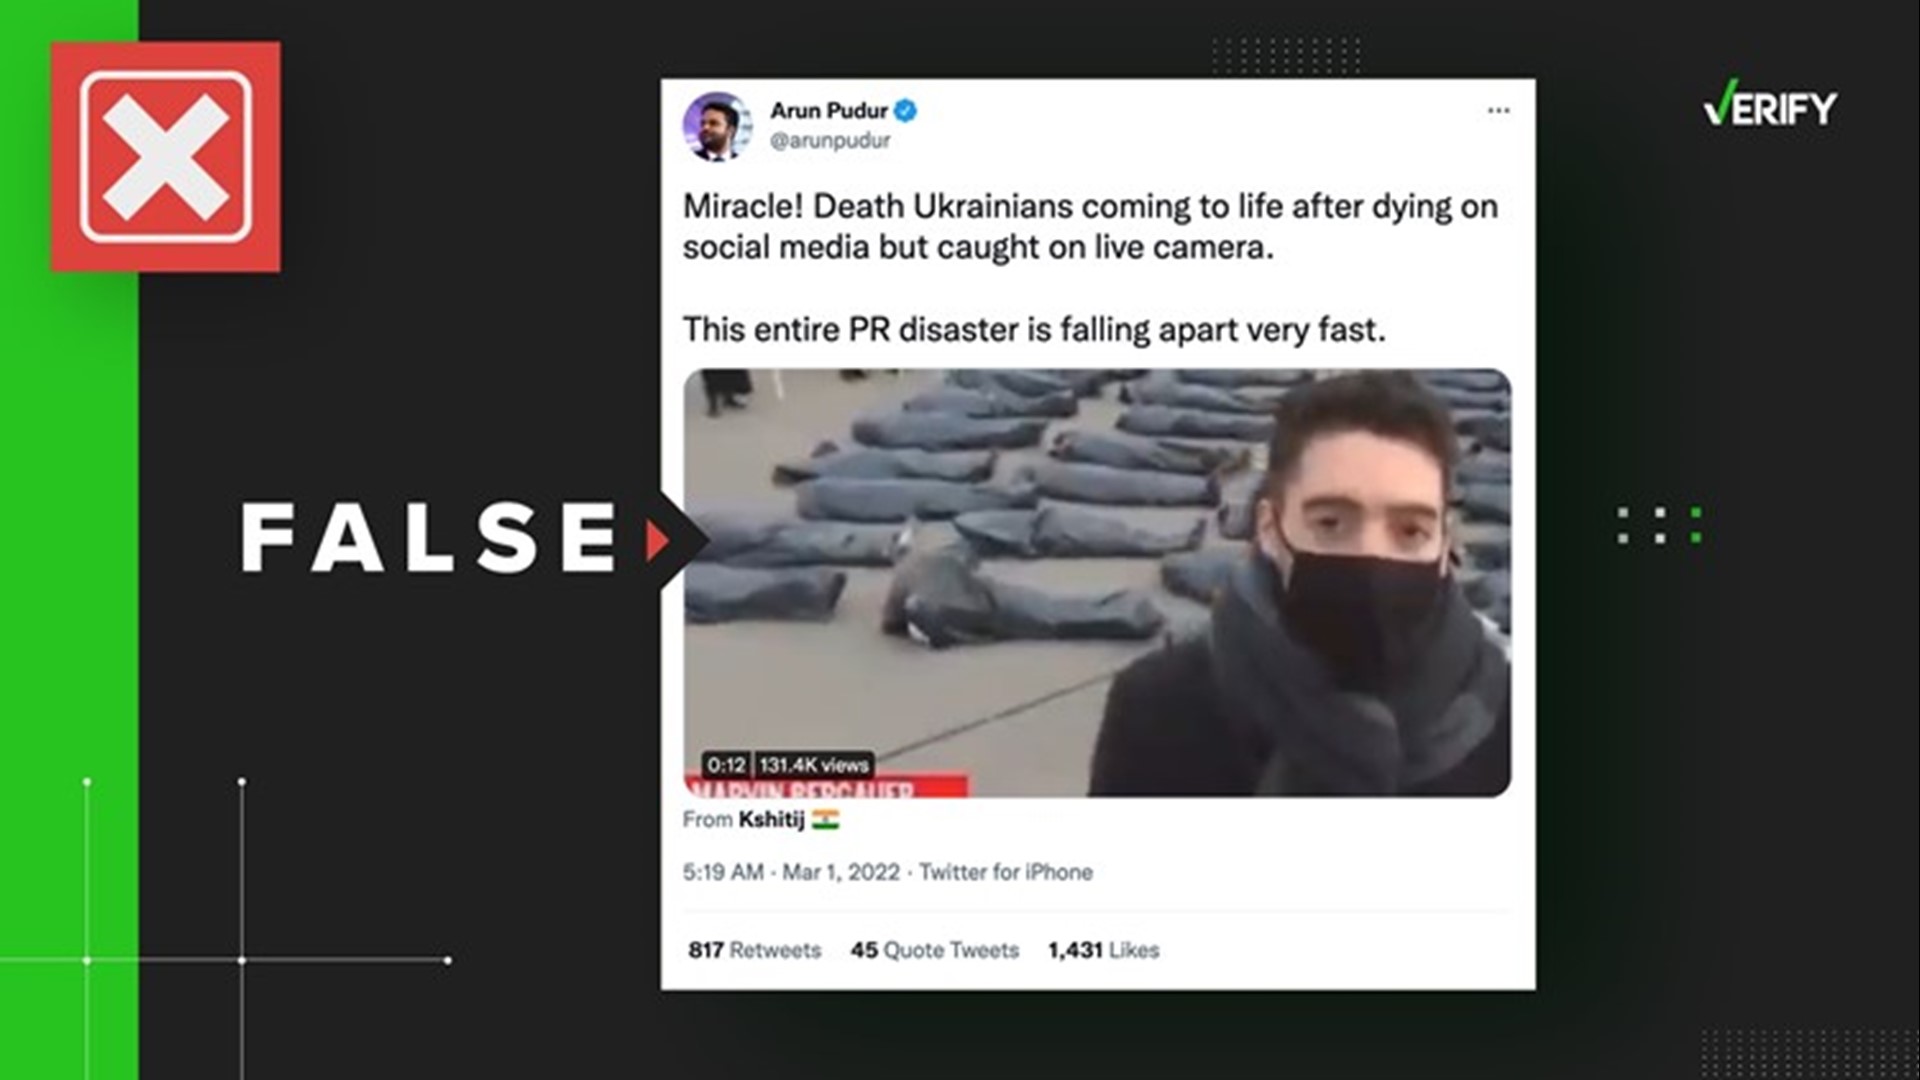 Some social media users are also accusing the Ukrainian government of spreading its own propaganda.